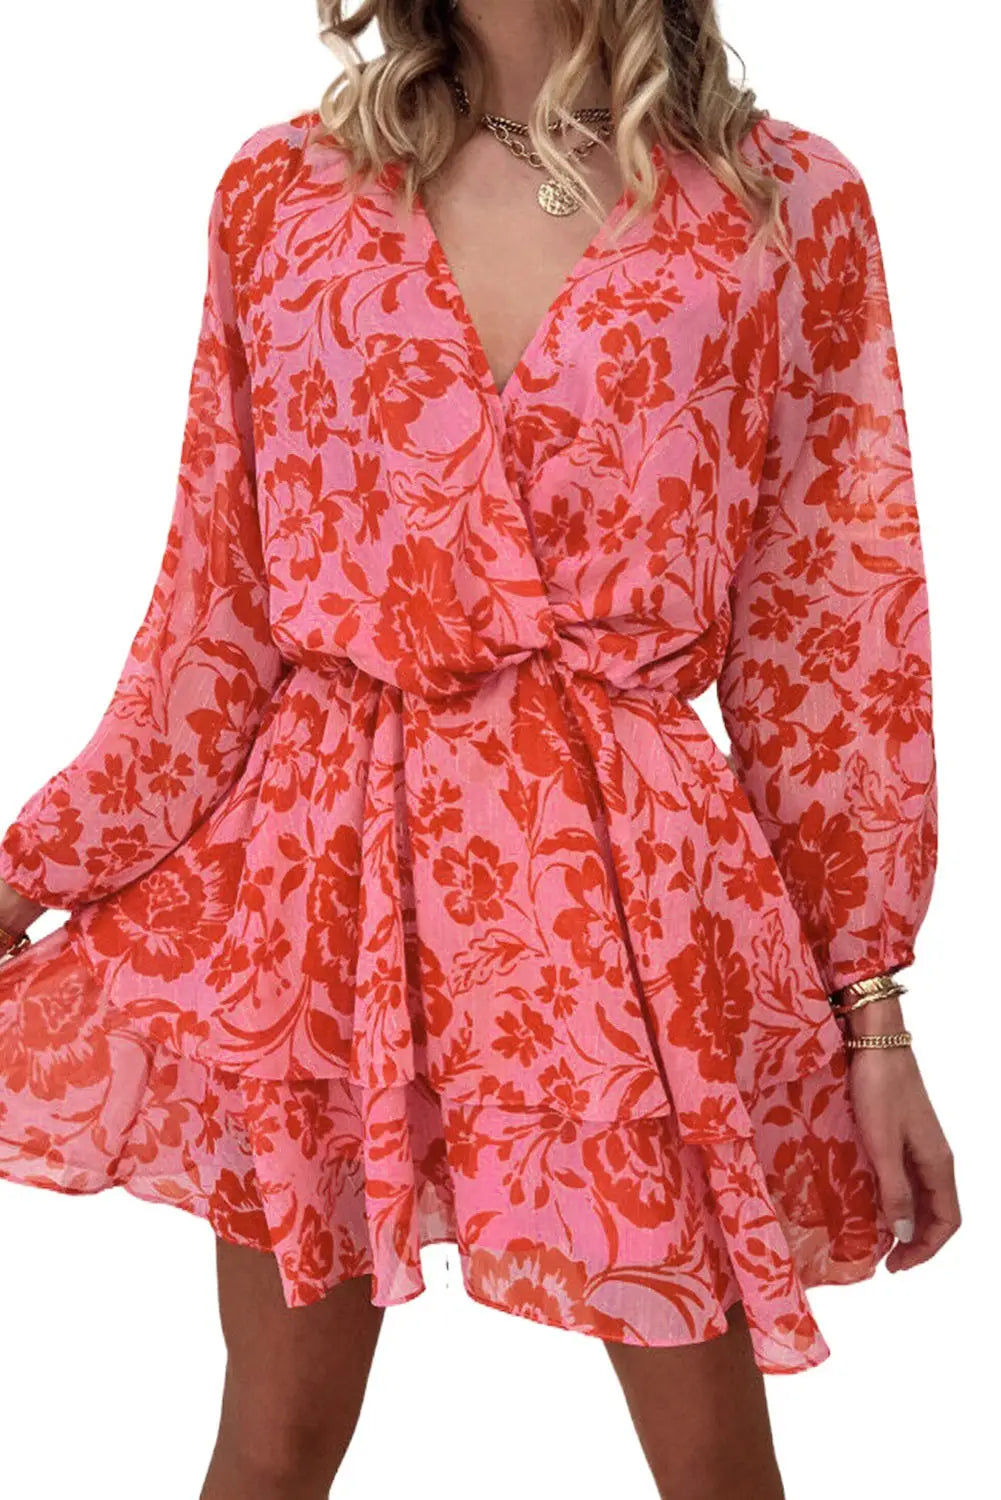 Red floral ruffle layered puff sleeve surplice dress - dresses